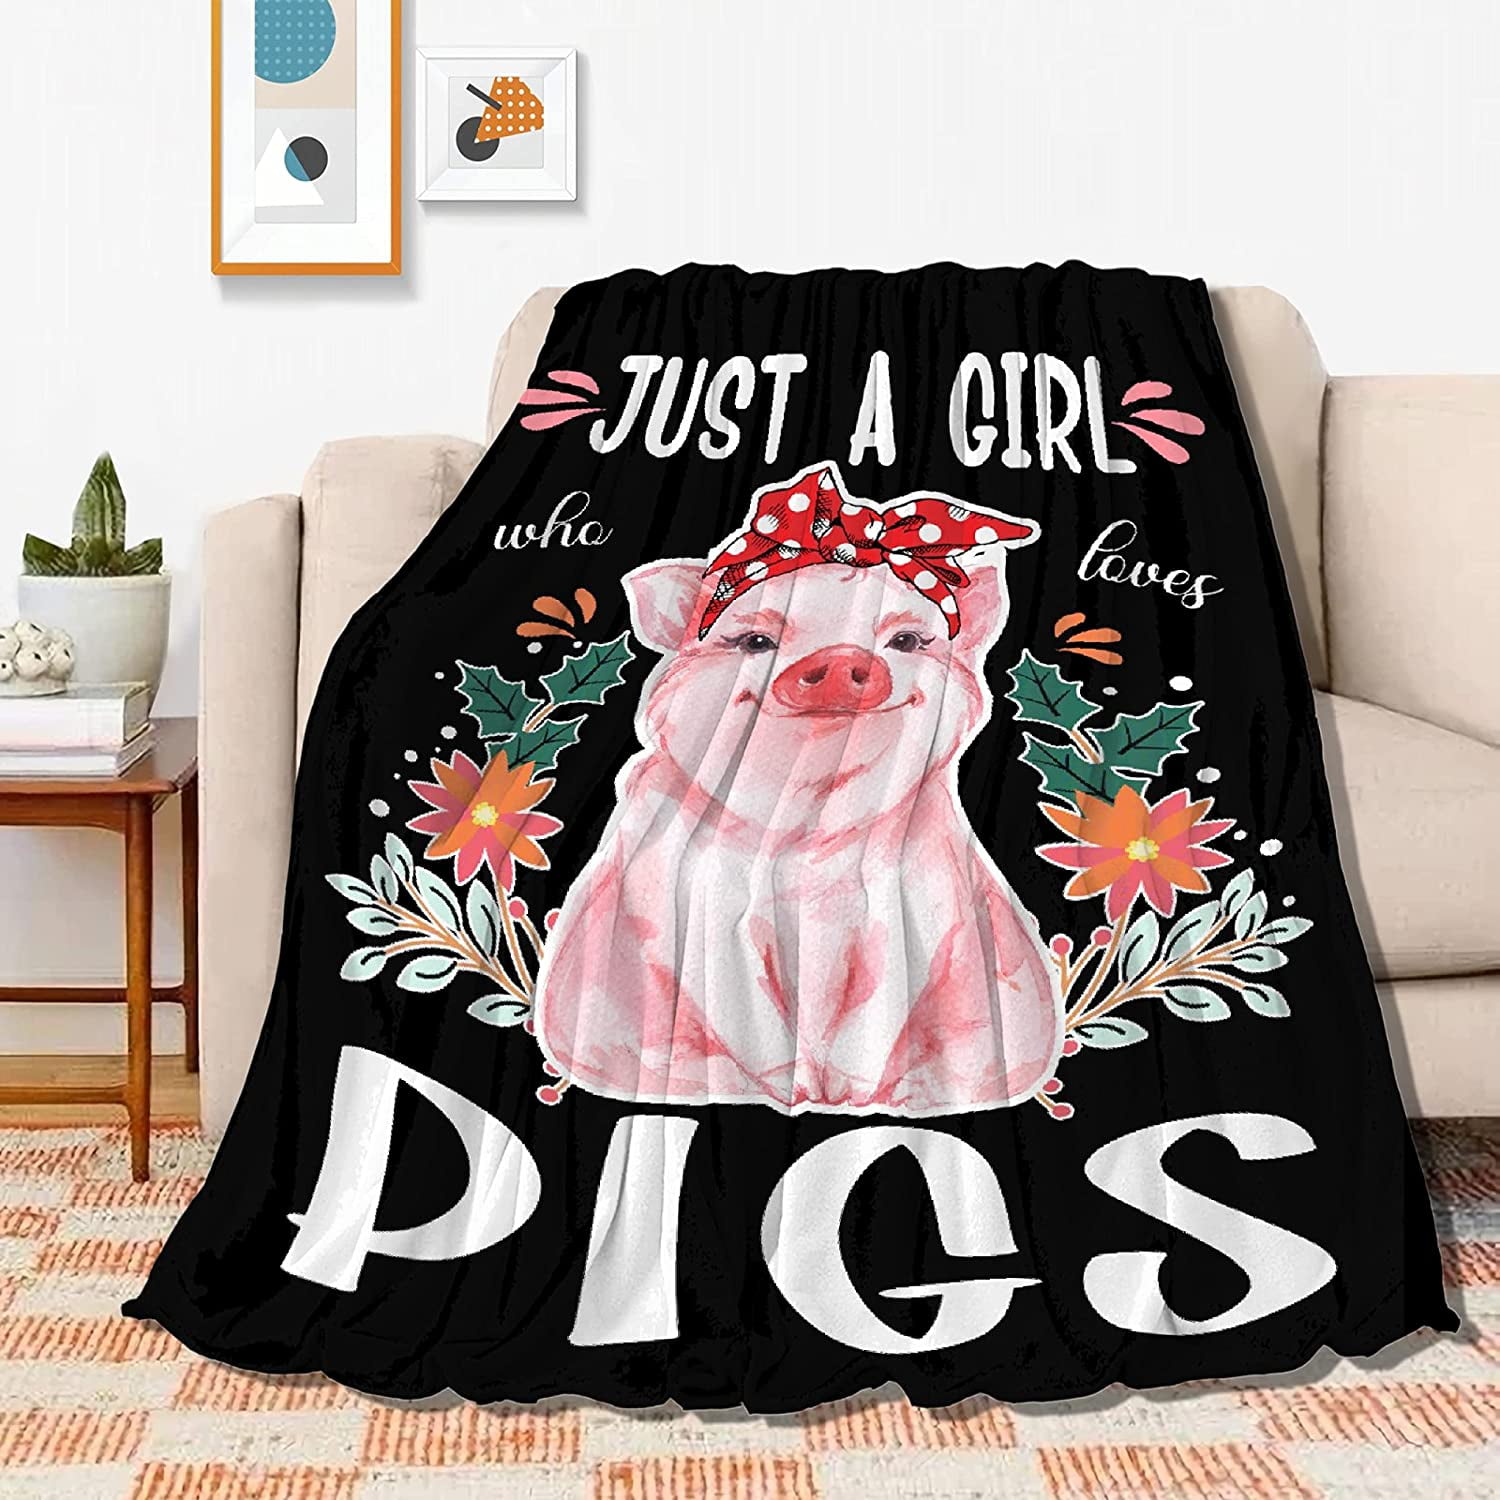 Fox Blanket for Girls Fox Gifts for Girls - Just A Girl Who Loves Foxes -  Lightweight Soft Cozy Flannel Throw Blanket Suitable for Sofa Bed Blankets  60x80 Inch for Aldult Blanket 